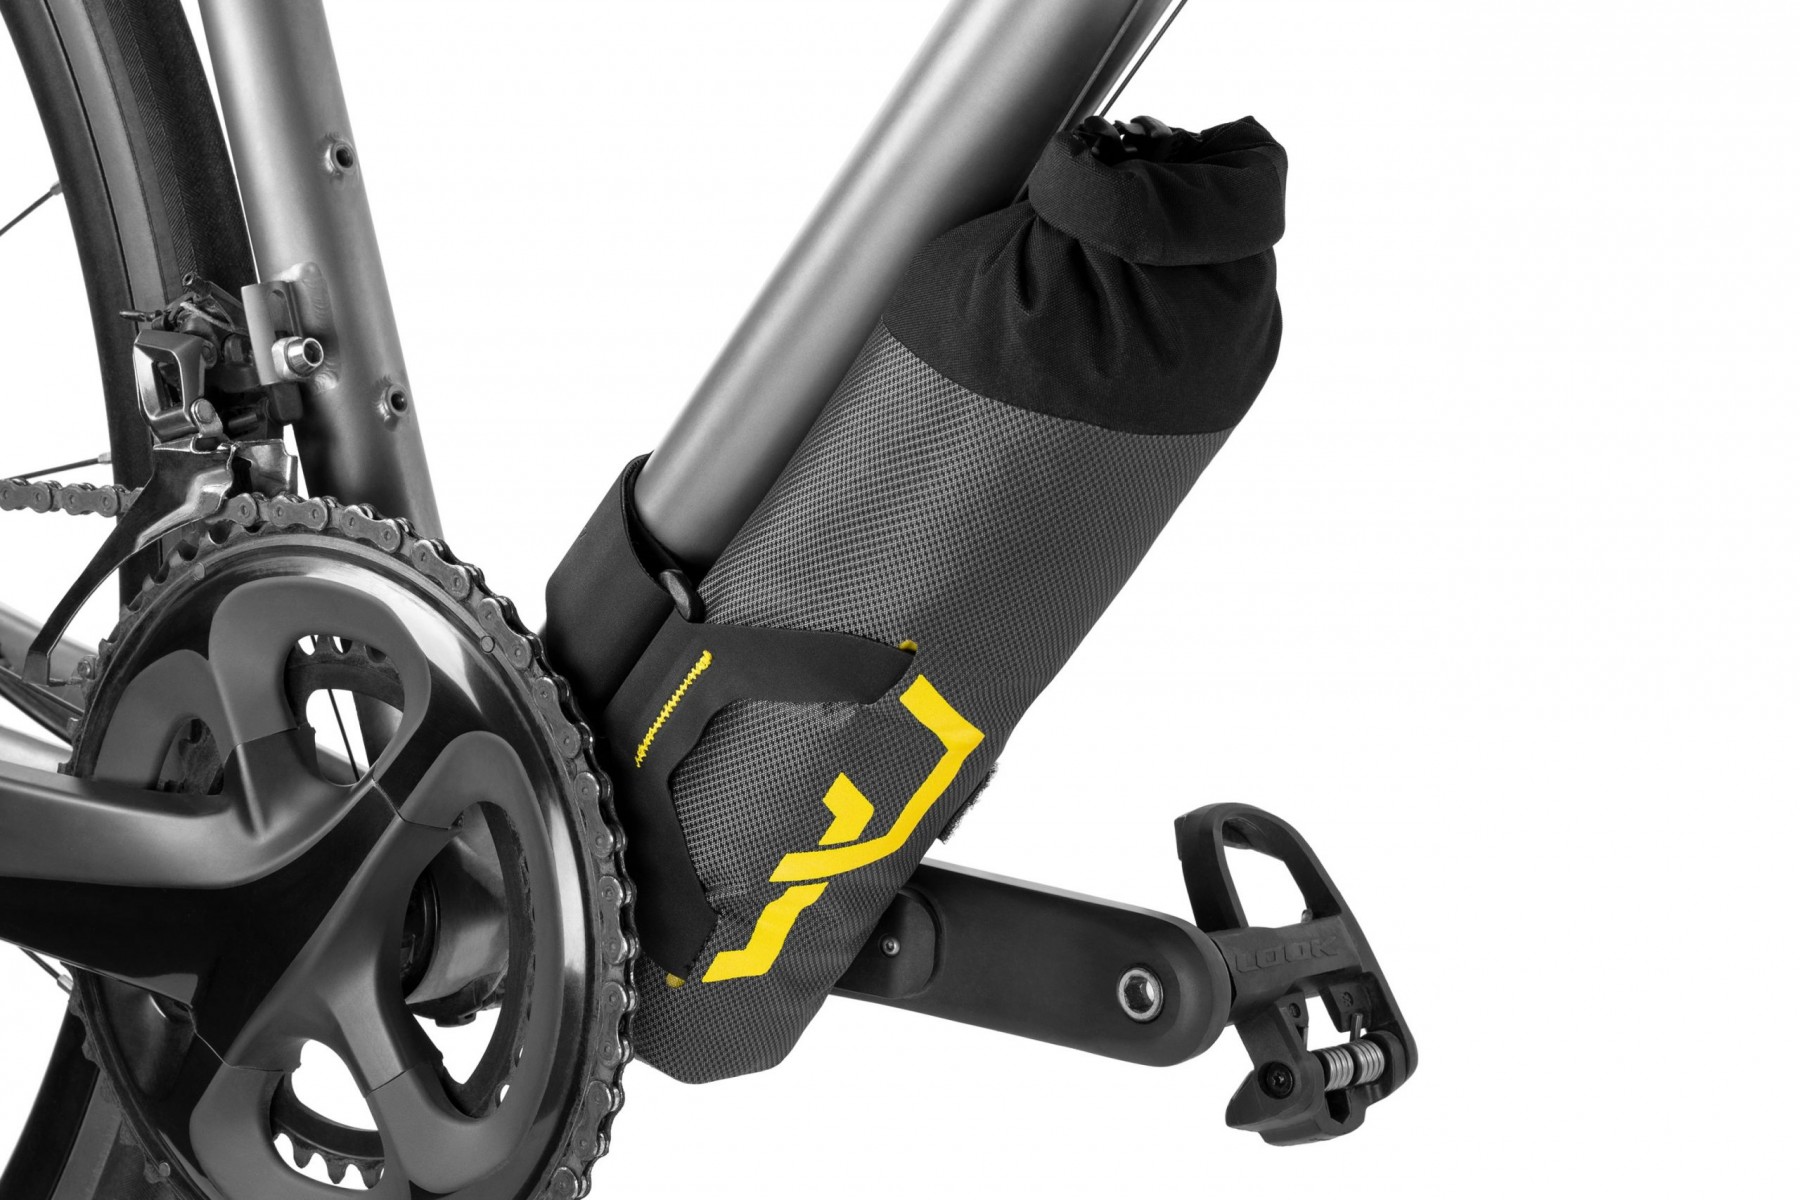 apidura-expedition-downtube-pack-1.5l-on-bike-2-hires-scaled